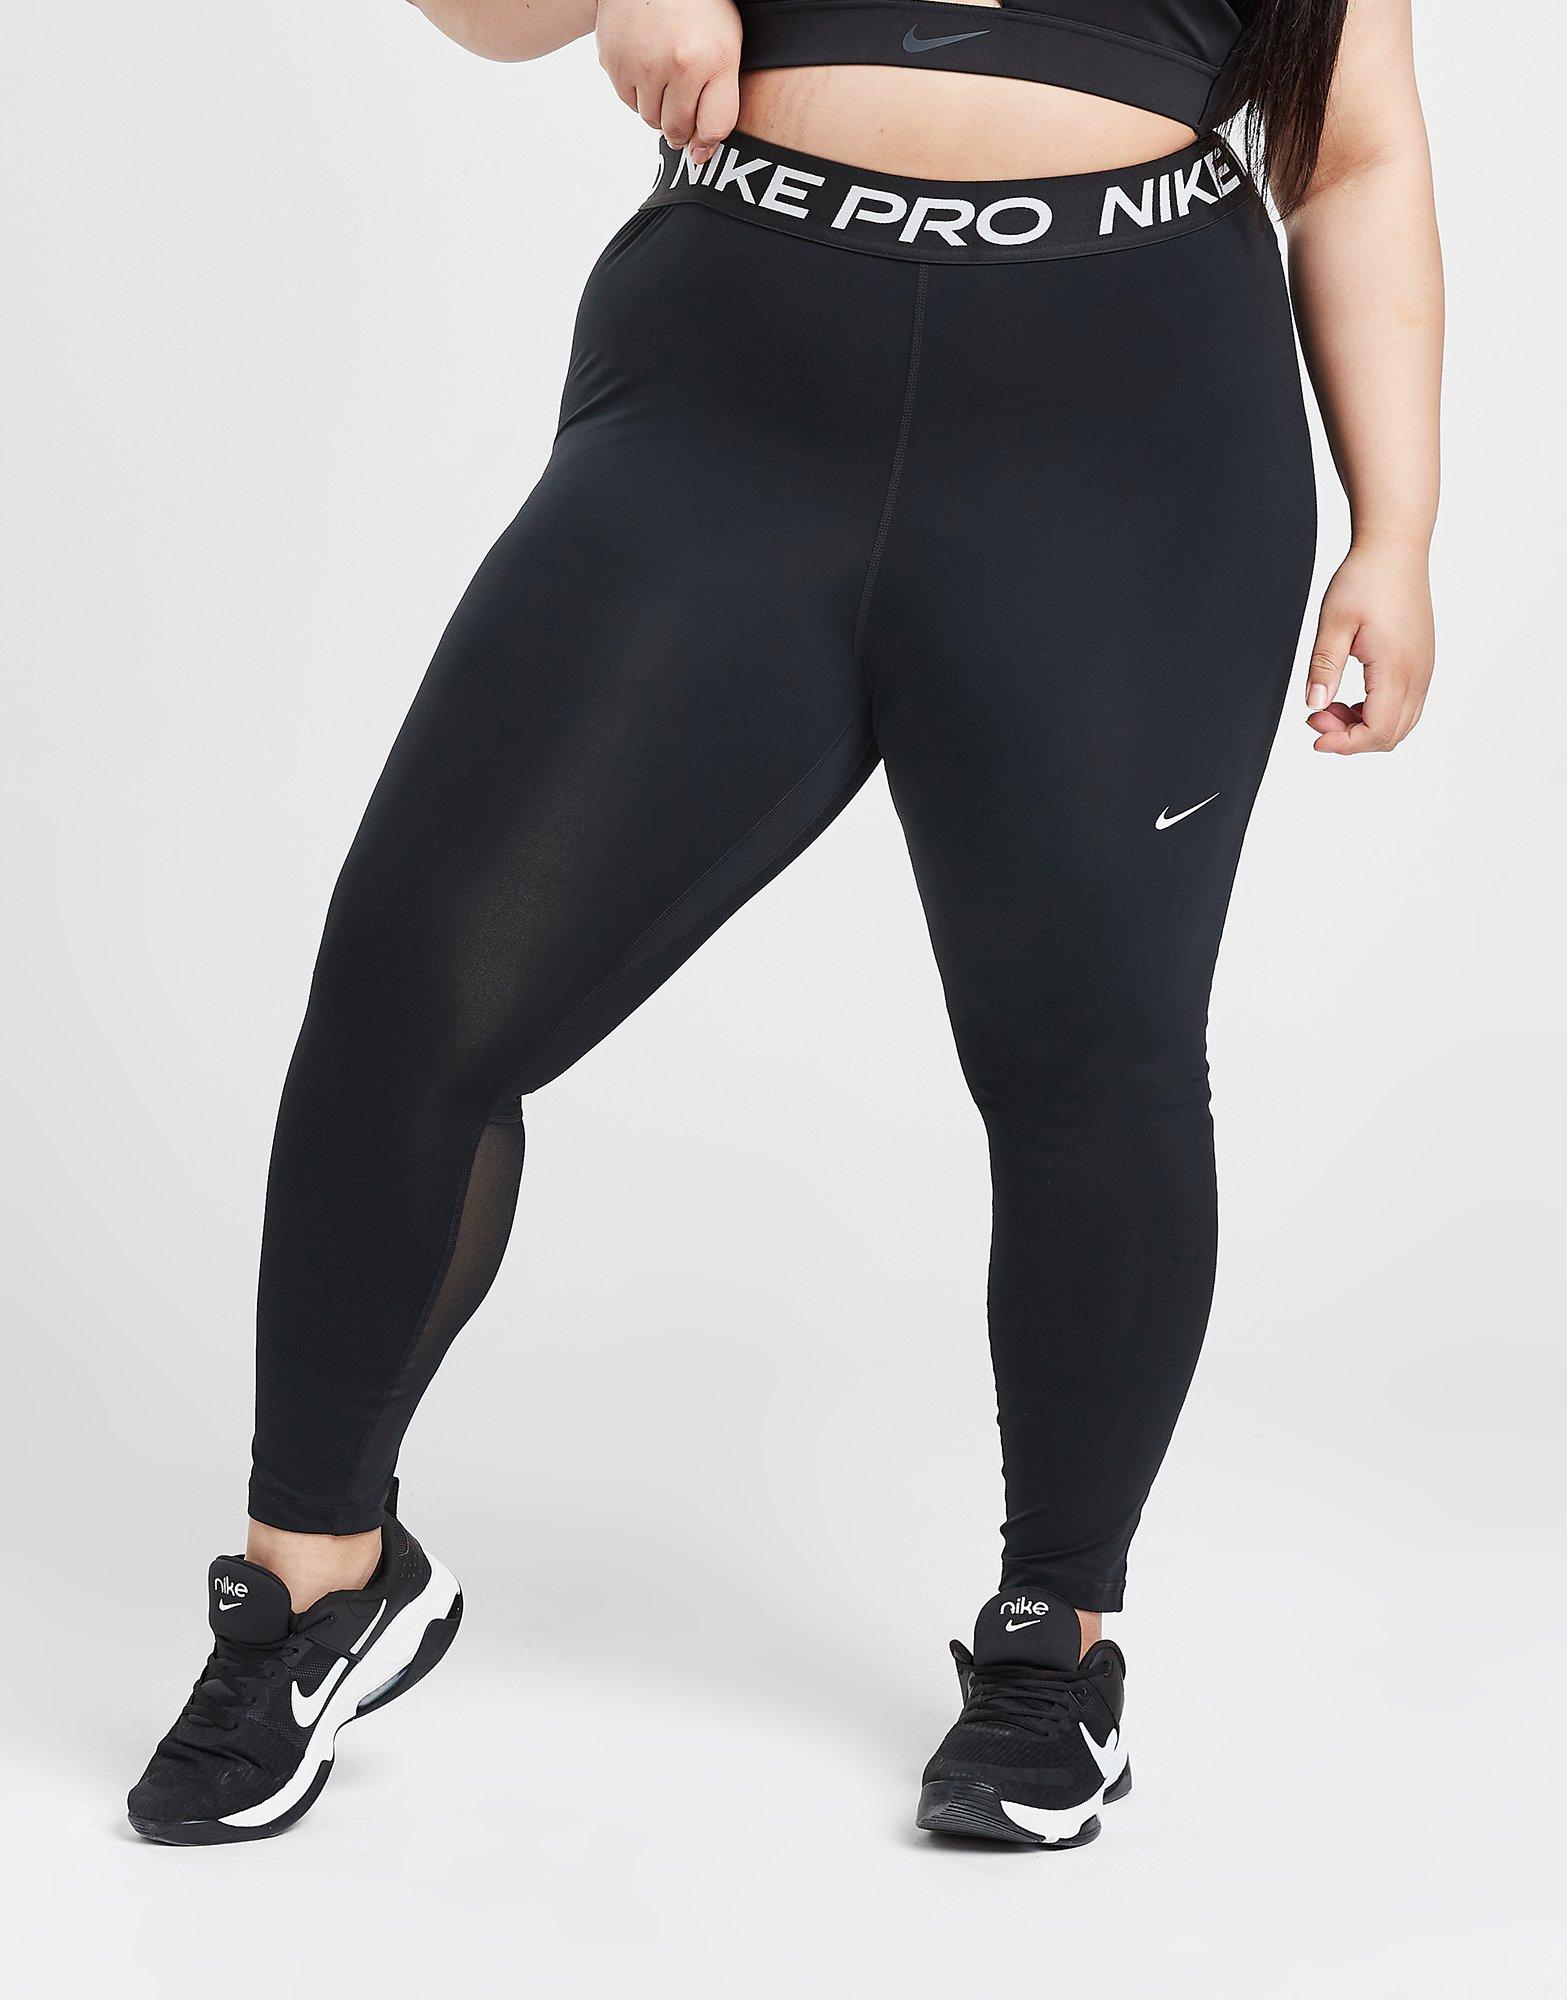 Reliable Faculty Harbor womens nike plus size leggings Relative path  Suffocating